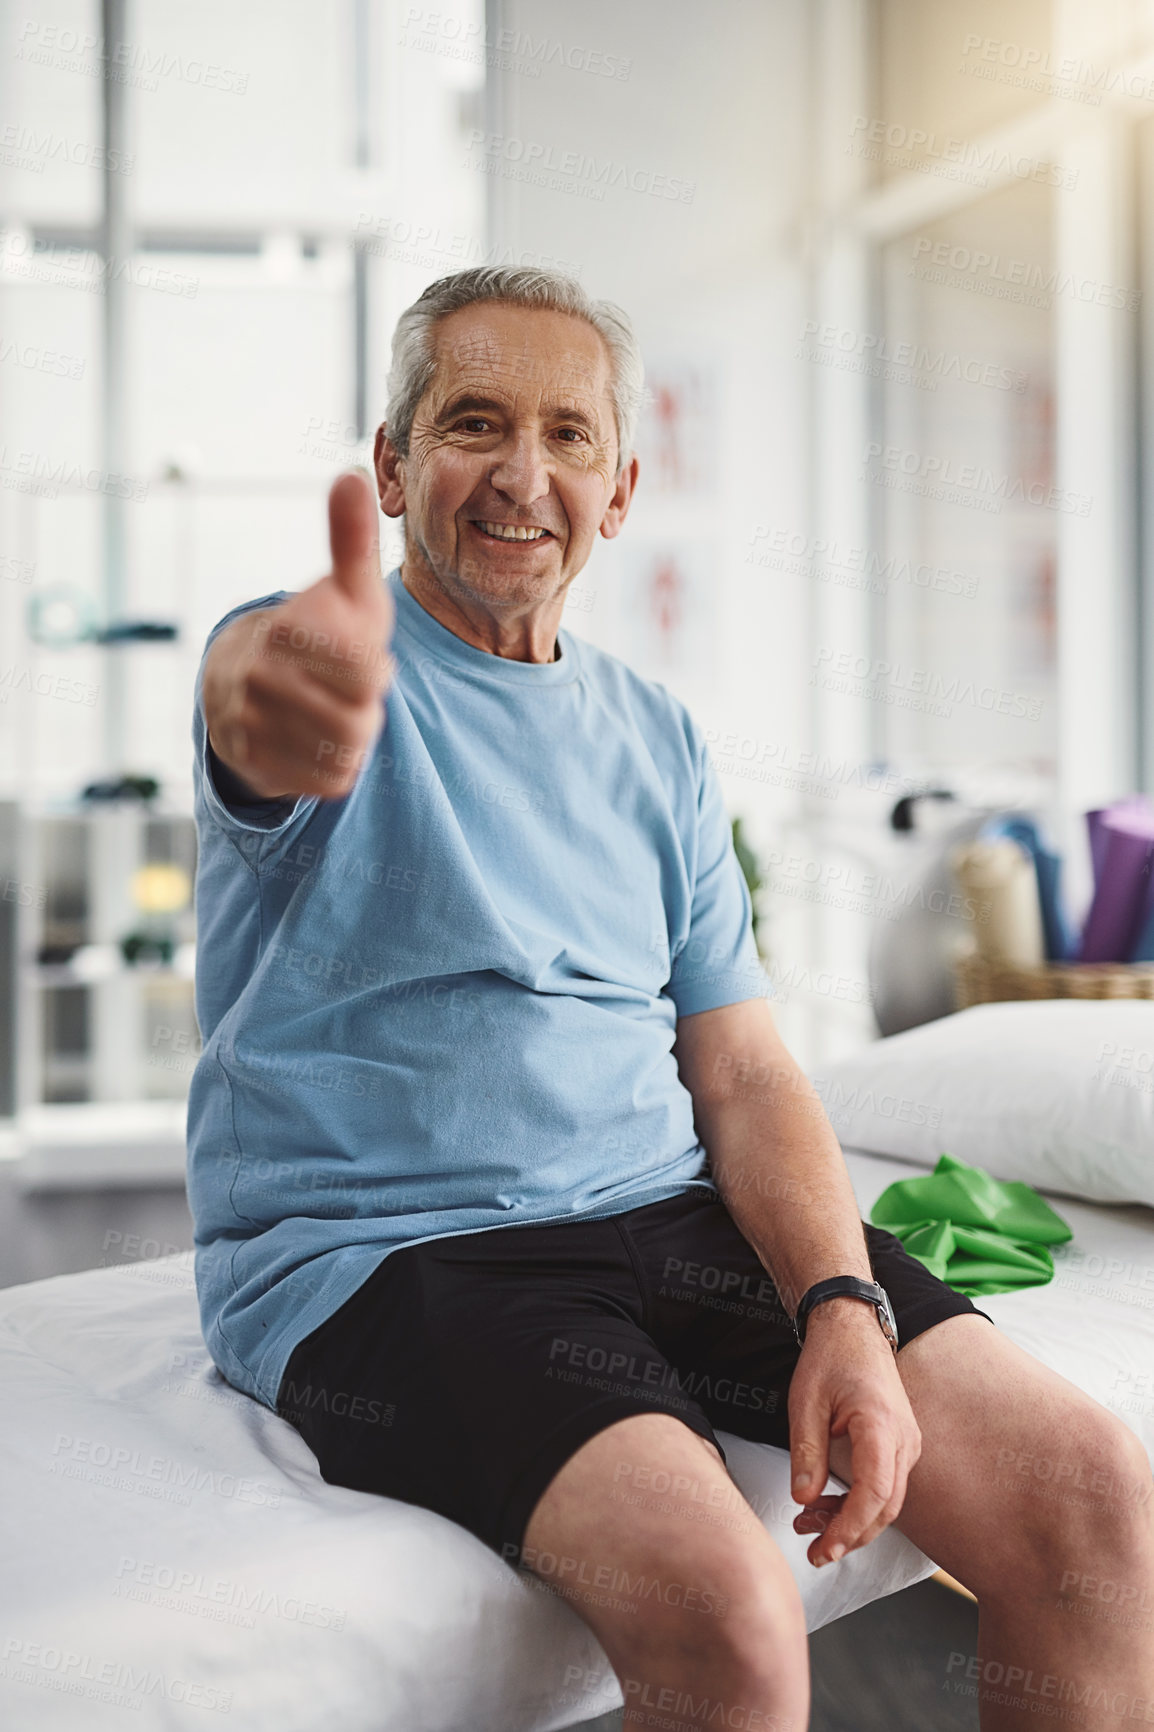 Buy stock photo Shot of a senior man showing thumbs up in a rehabilitation centre